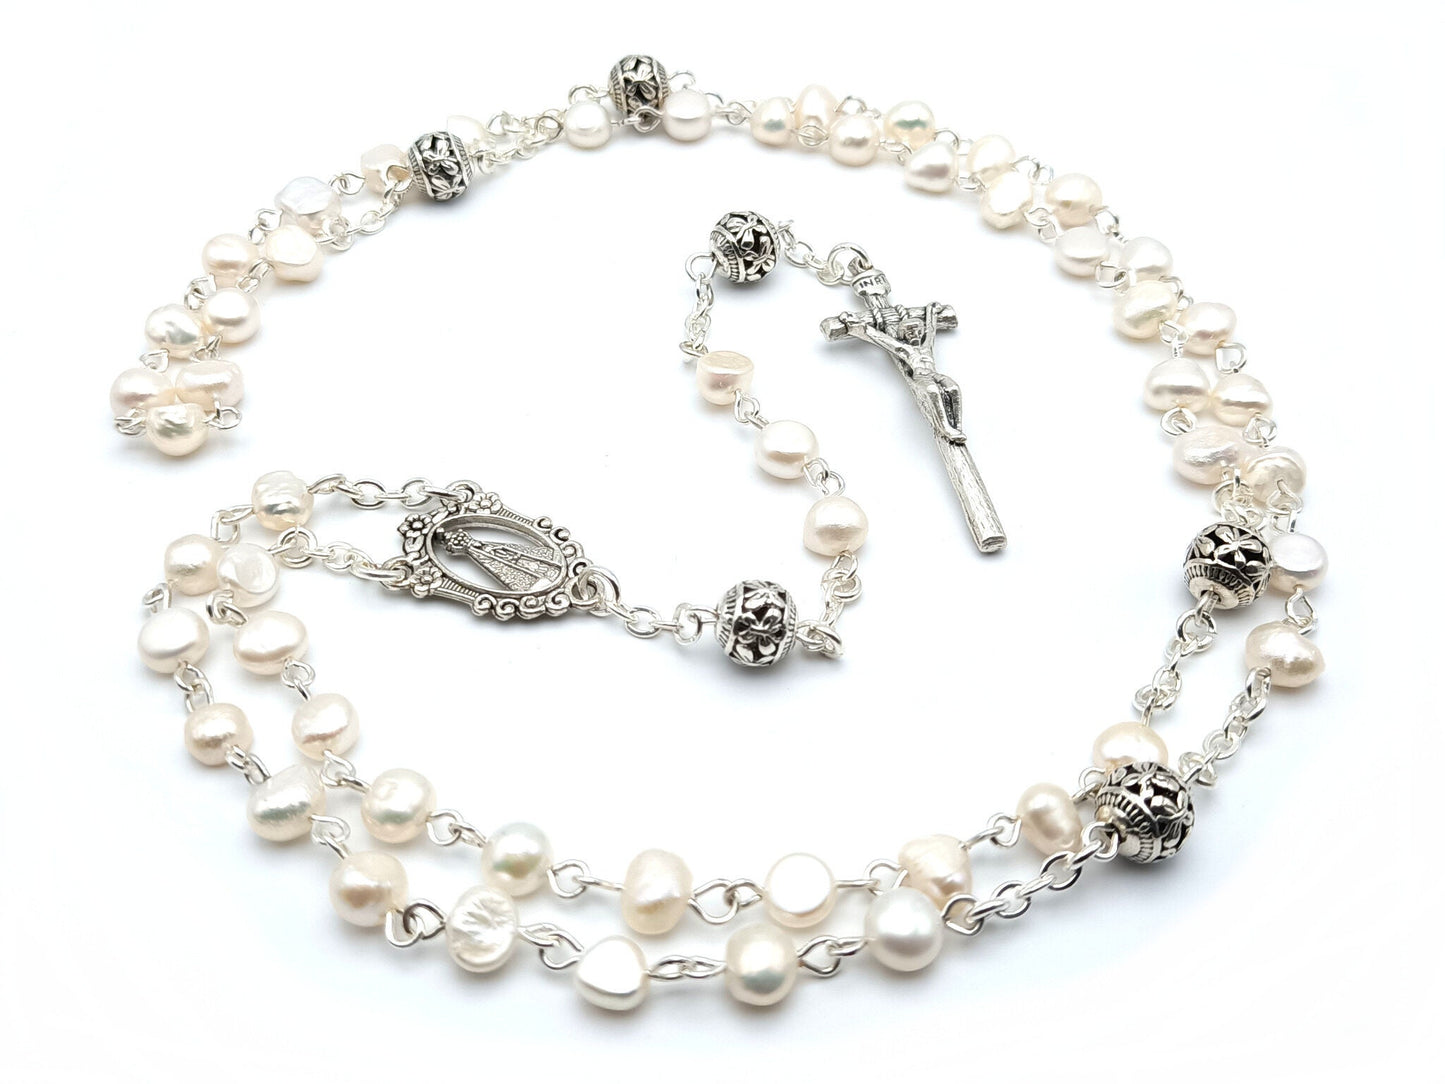 Our Lady of Loretto unique rosary beads with fresh water pearl beads, silver crucifix, pater beads and centre medal.